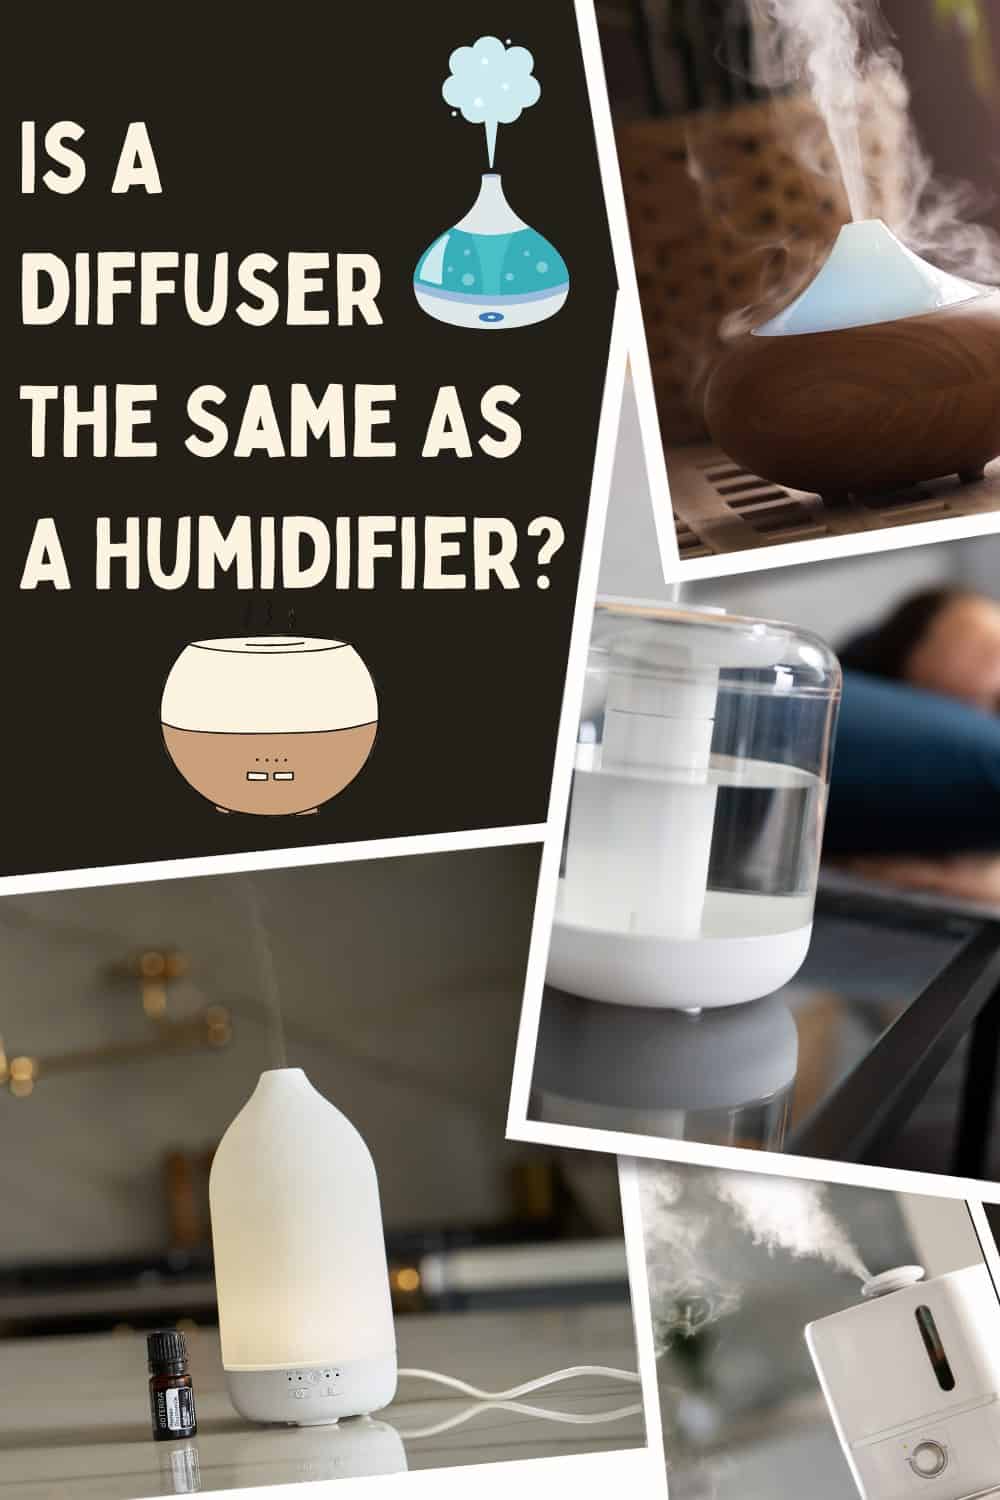 A diffuser and a humidifier are not the same